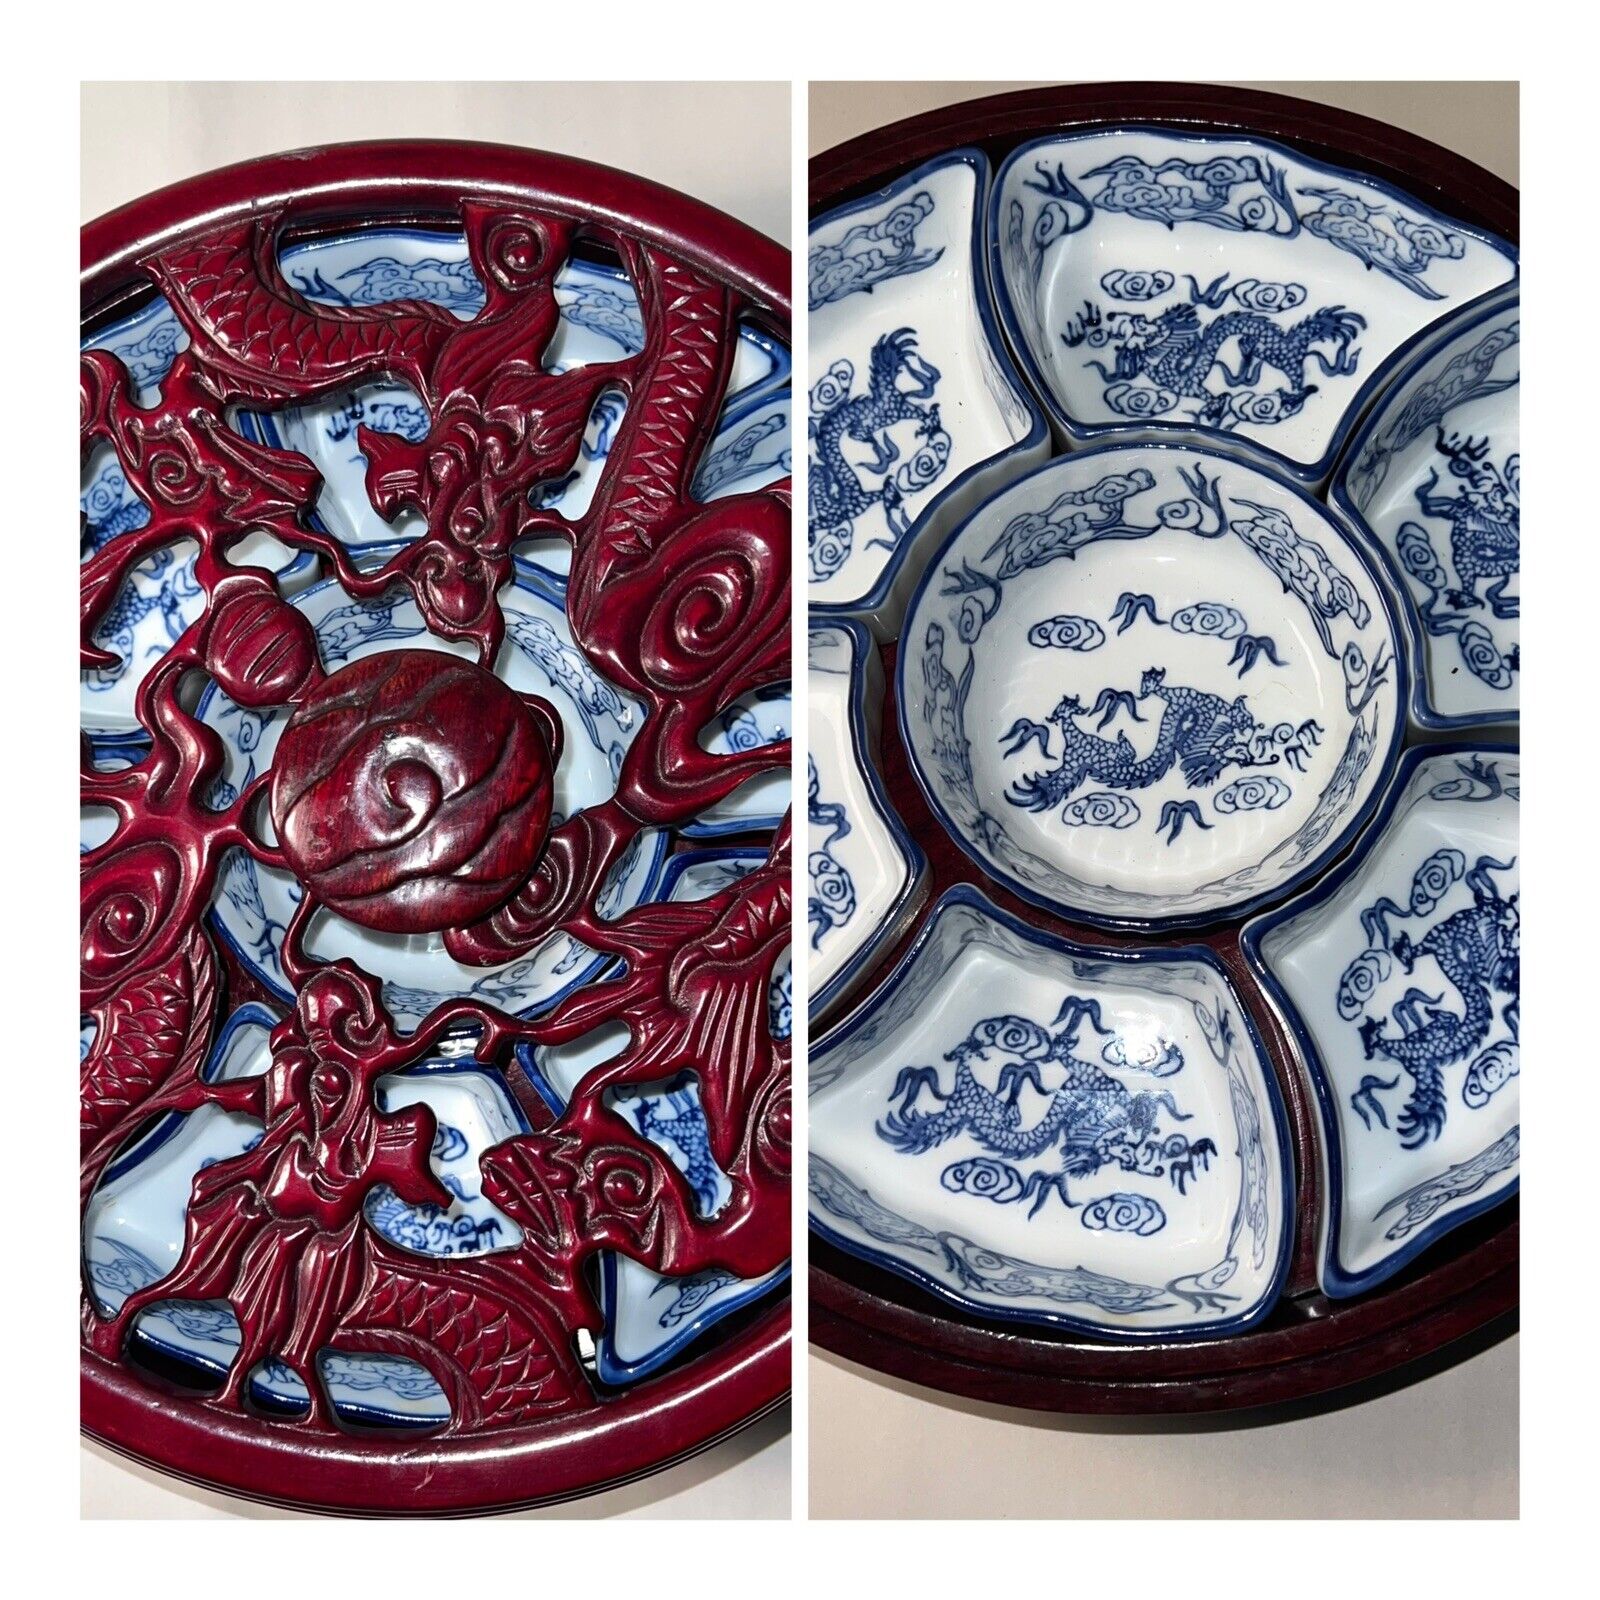 AUTHENTIC ASIAN BEAUTIFUL JAPANESE/CHINESE FULL DRAGON LAZY SUSAN TURN TABLE